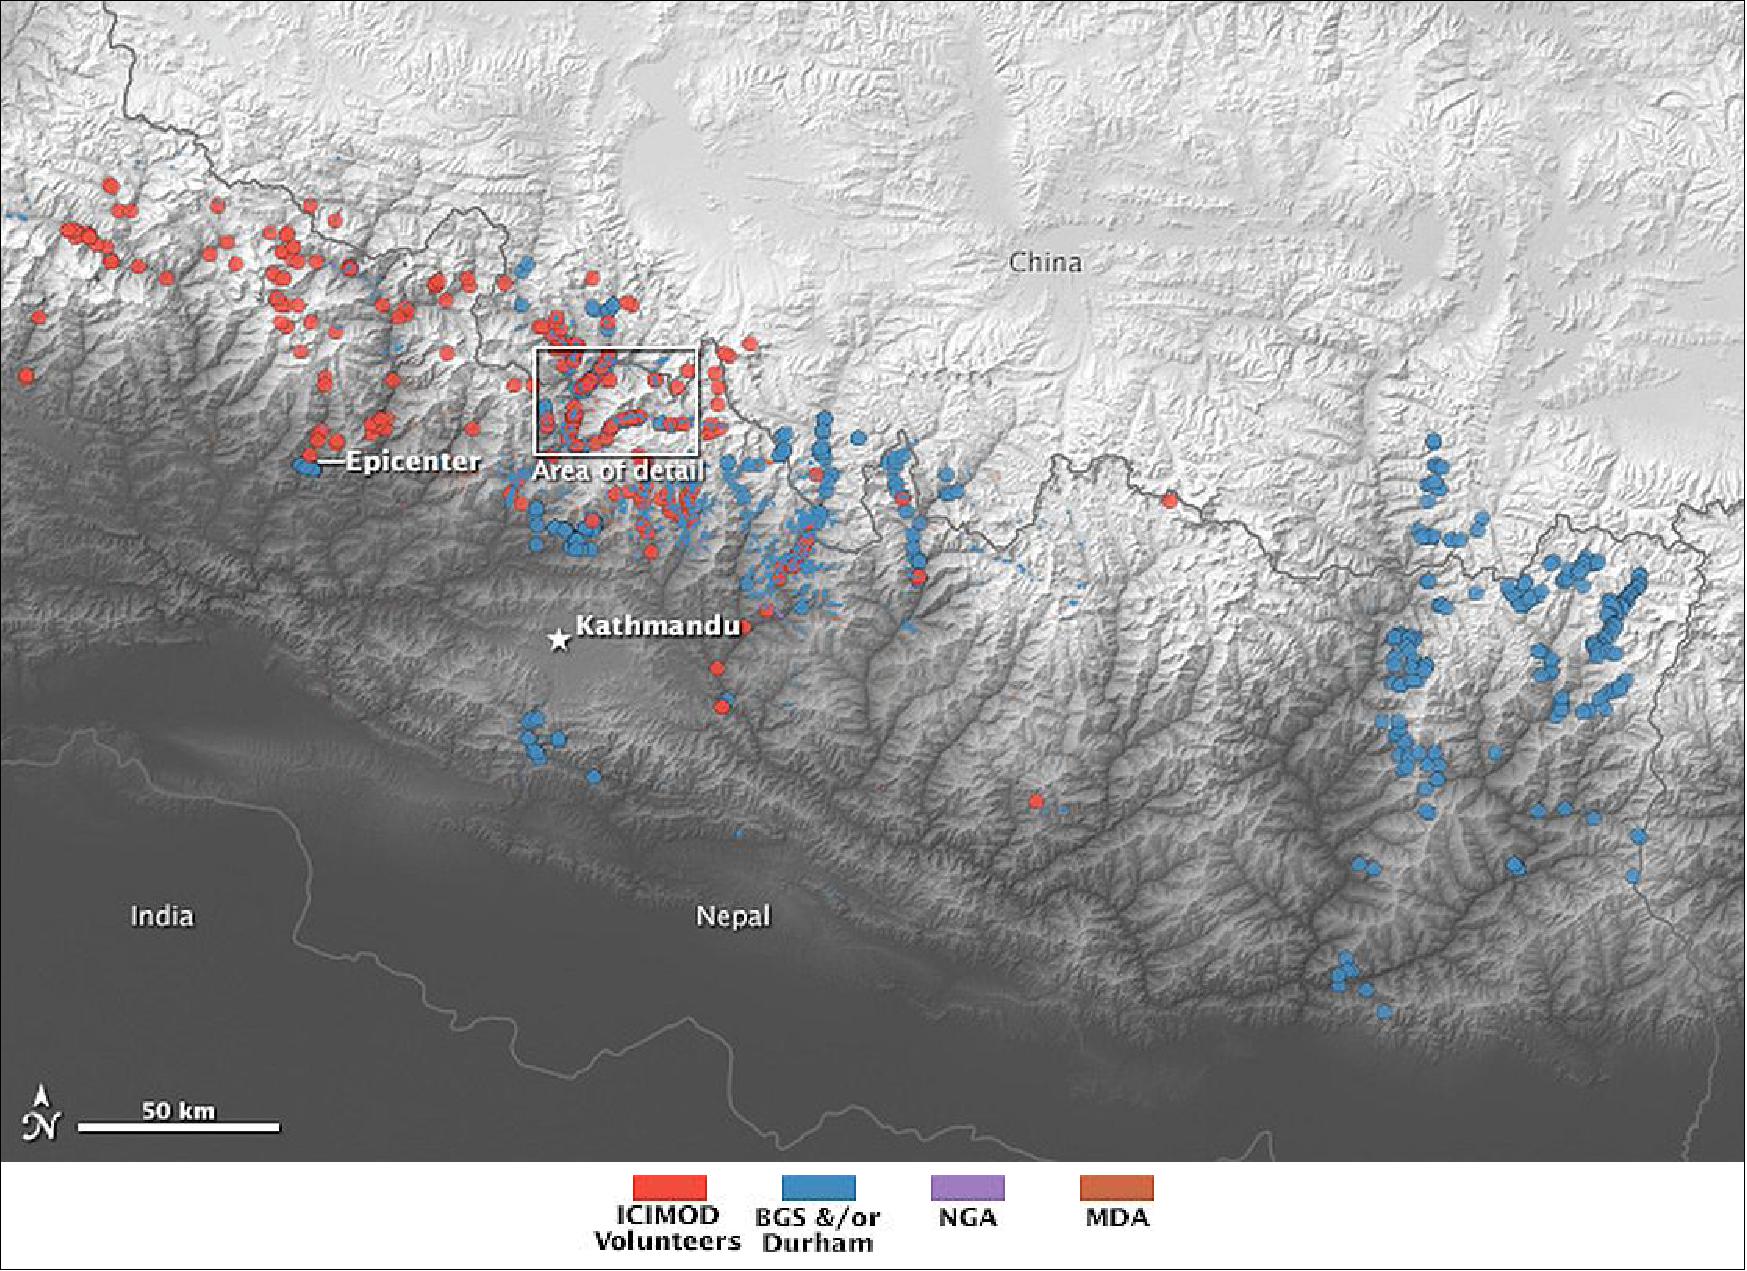 Figure 101: Map of the Nepal Gorkha earthquake locations of landslide events and hazards acquired by instruments on various spacecraft (image credit: NASA Earth Observatory, Jesse Allen)